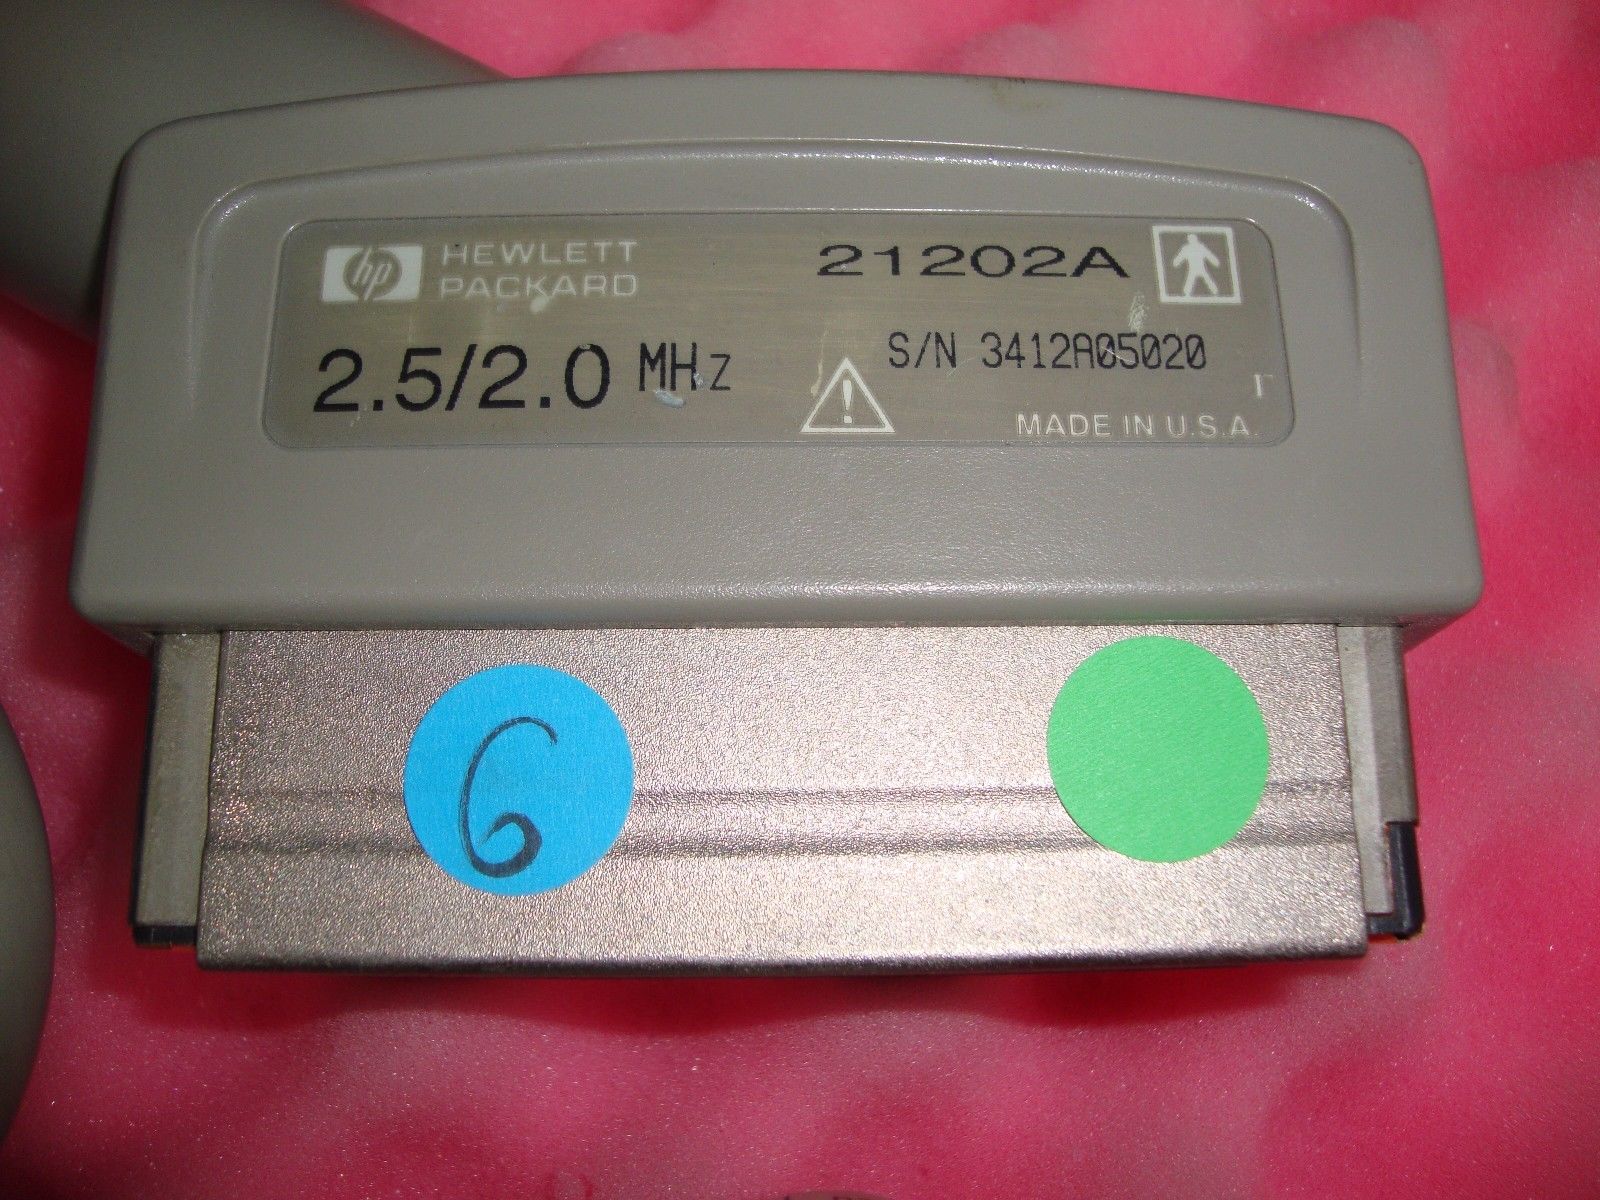 HP 21202A  2.5/2.0 MHz Frequency  Ultrasound probe